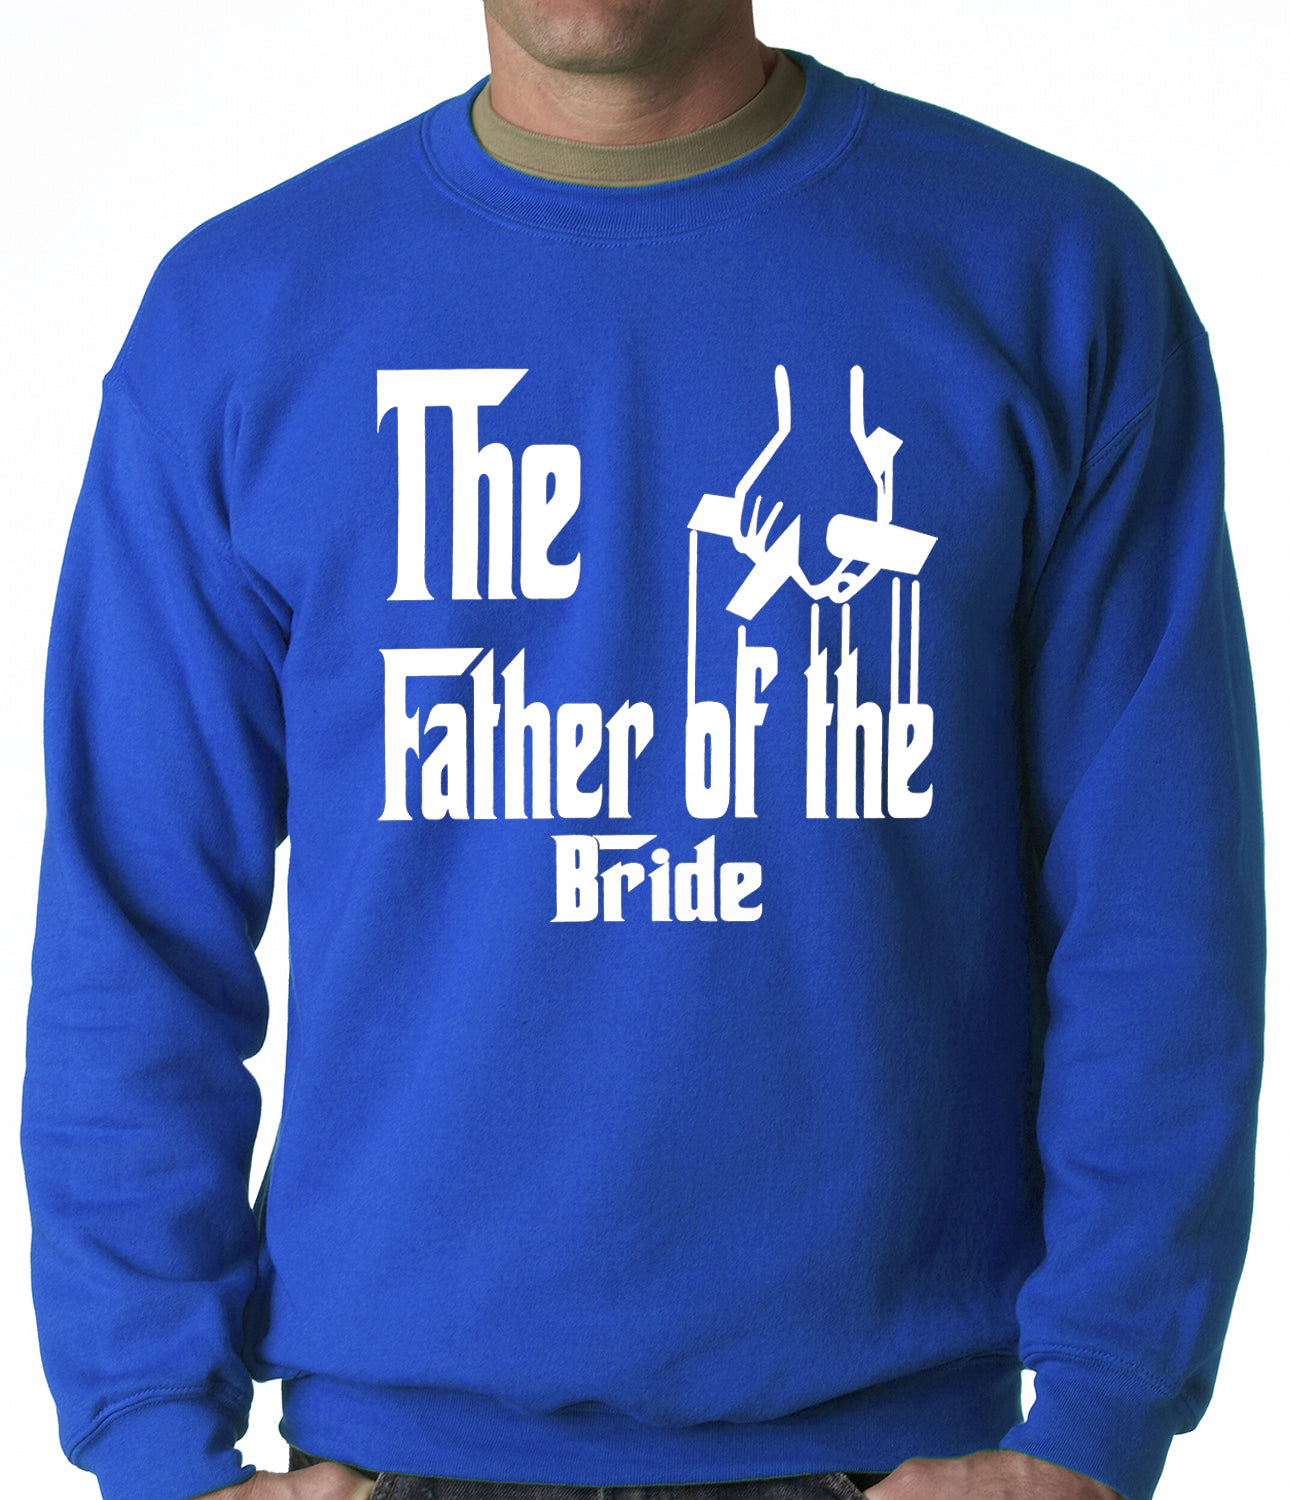 The Father of the Bride Funny Adult Crewneck